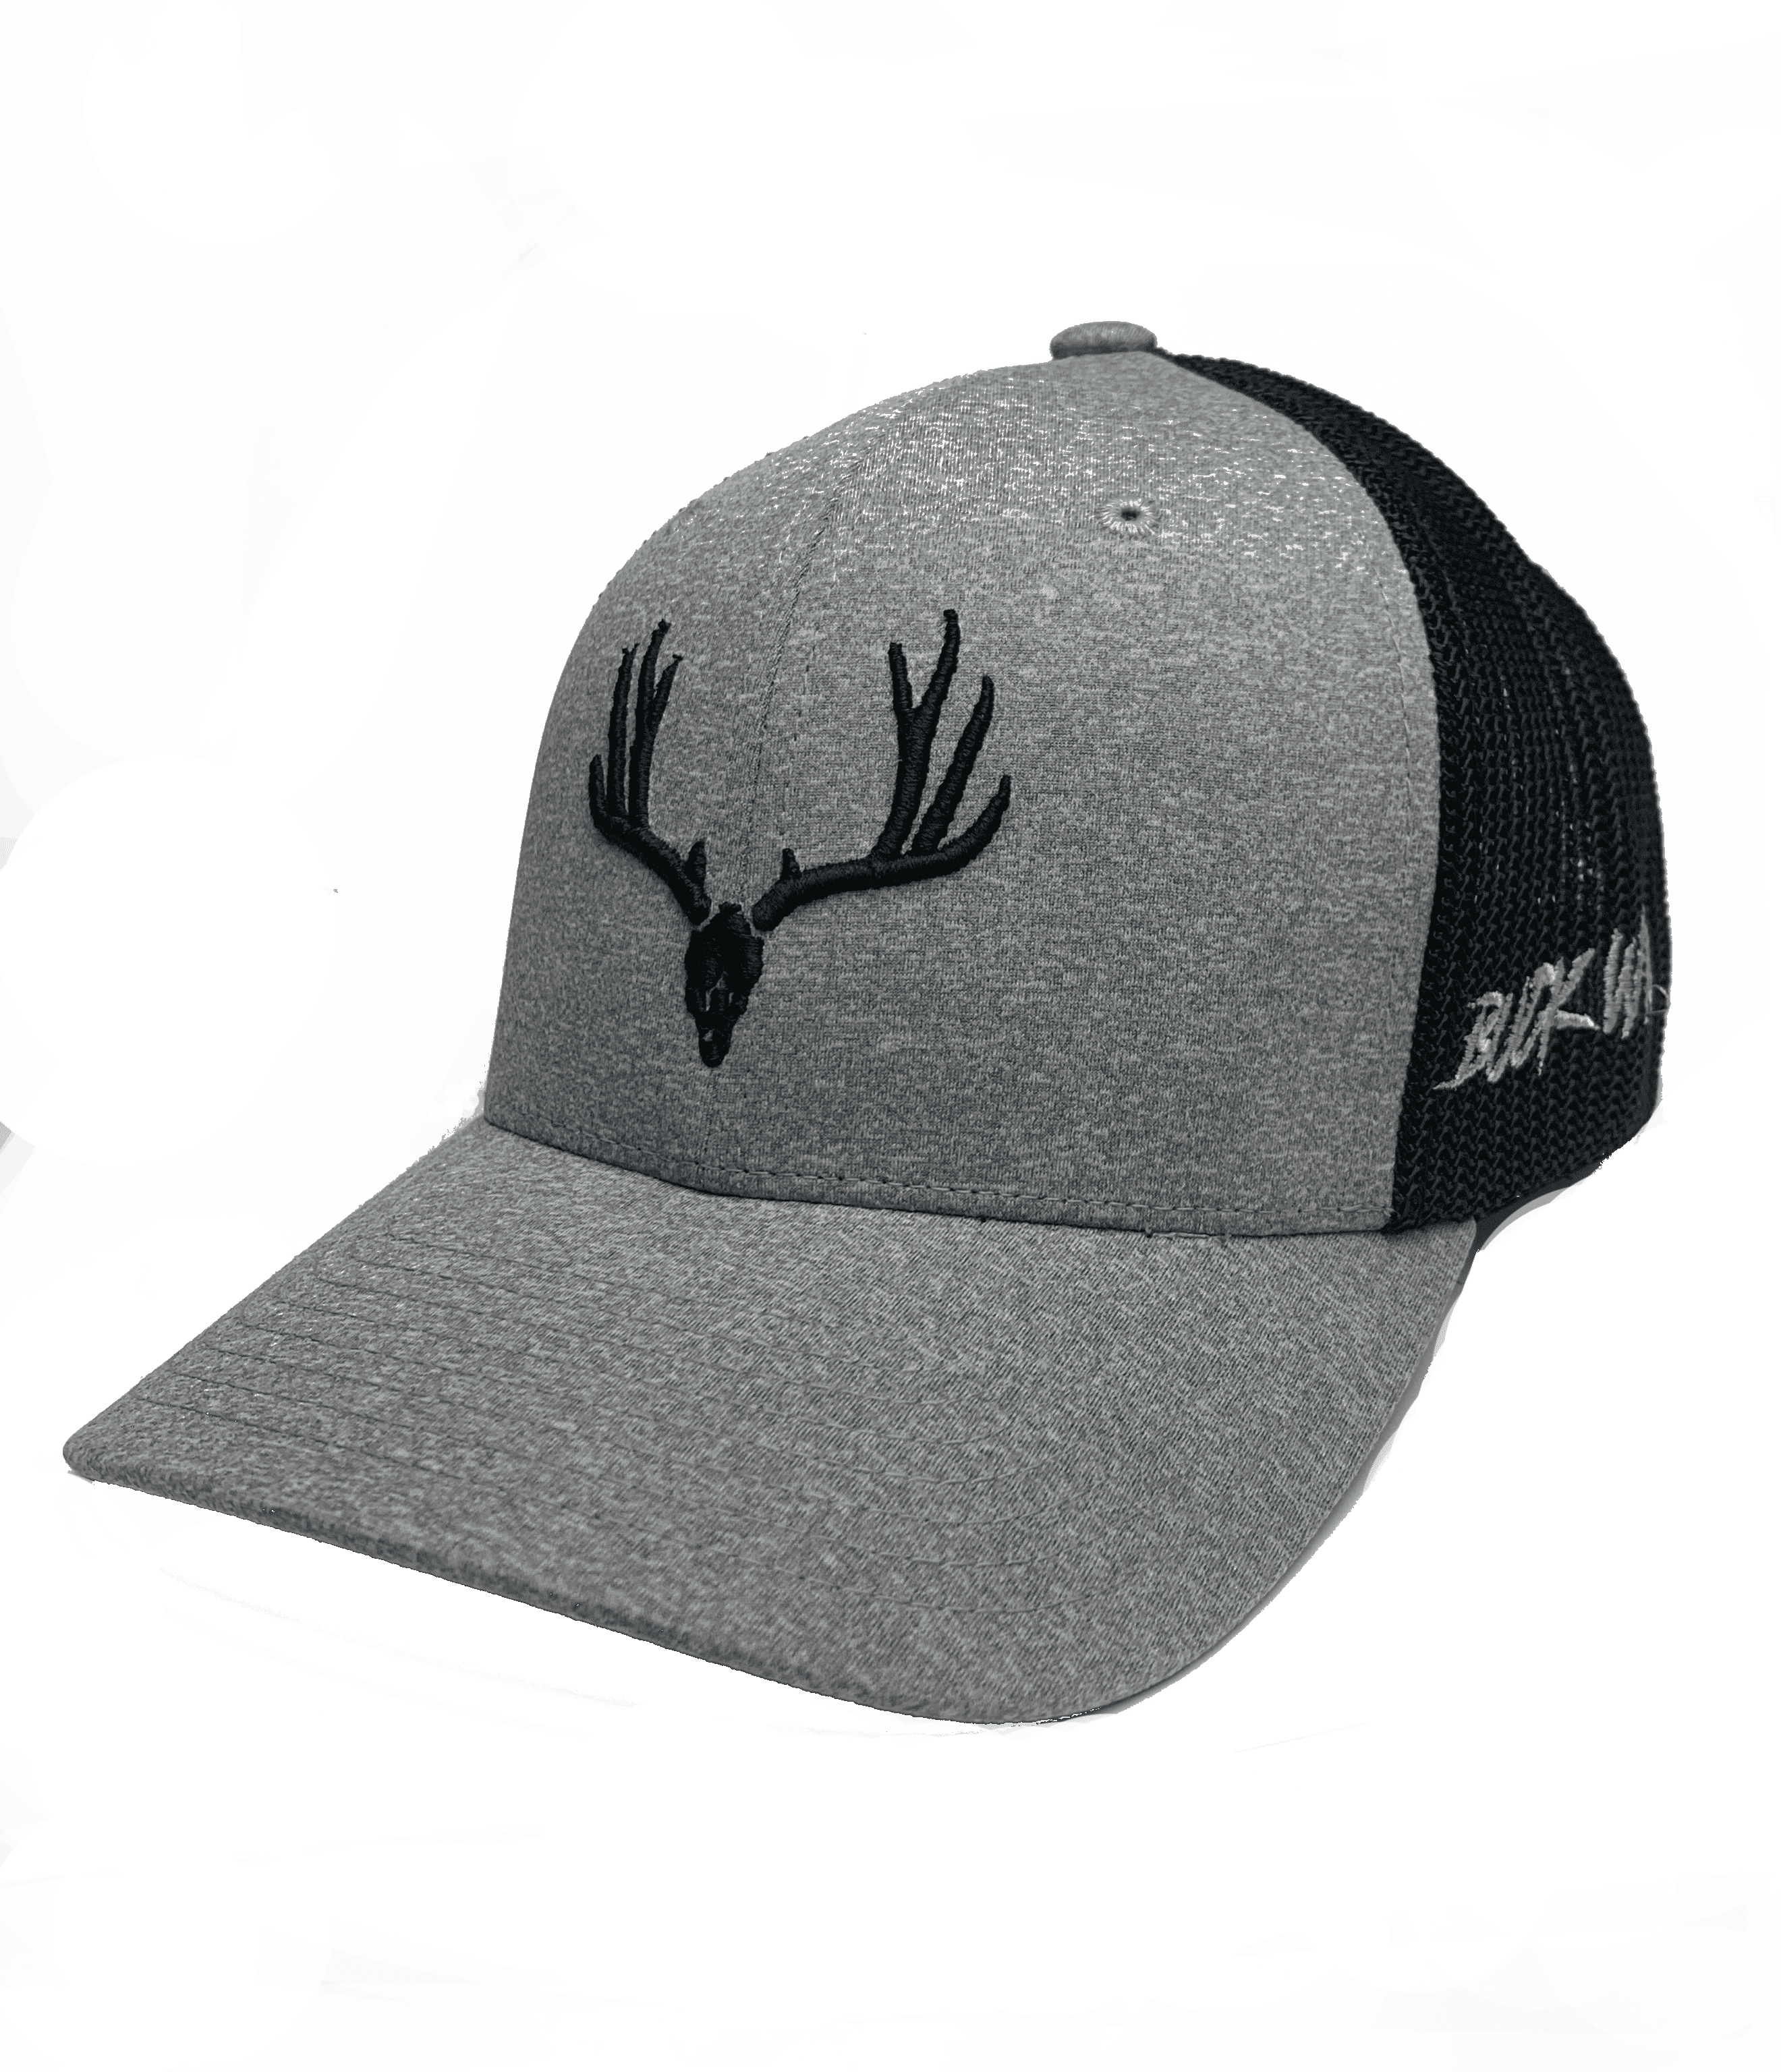 Logo With Wild Hat OSFA Black Flex Gray Charcoal Buck Red Hat Fit or